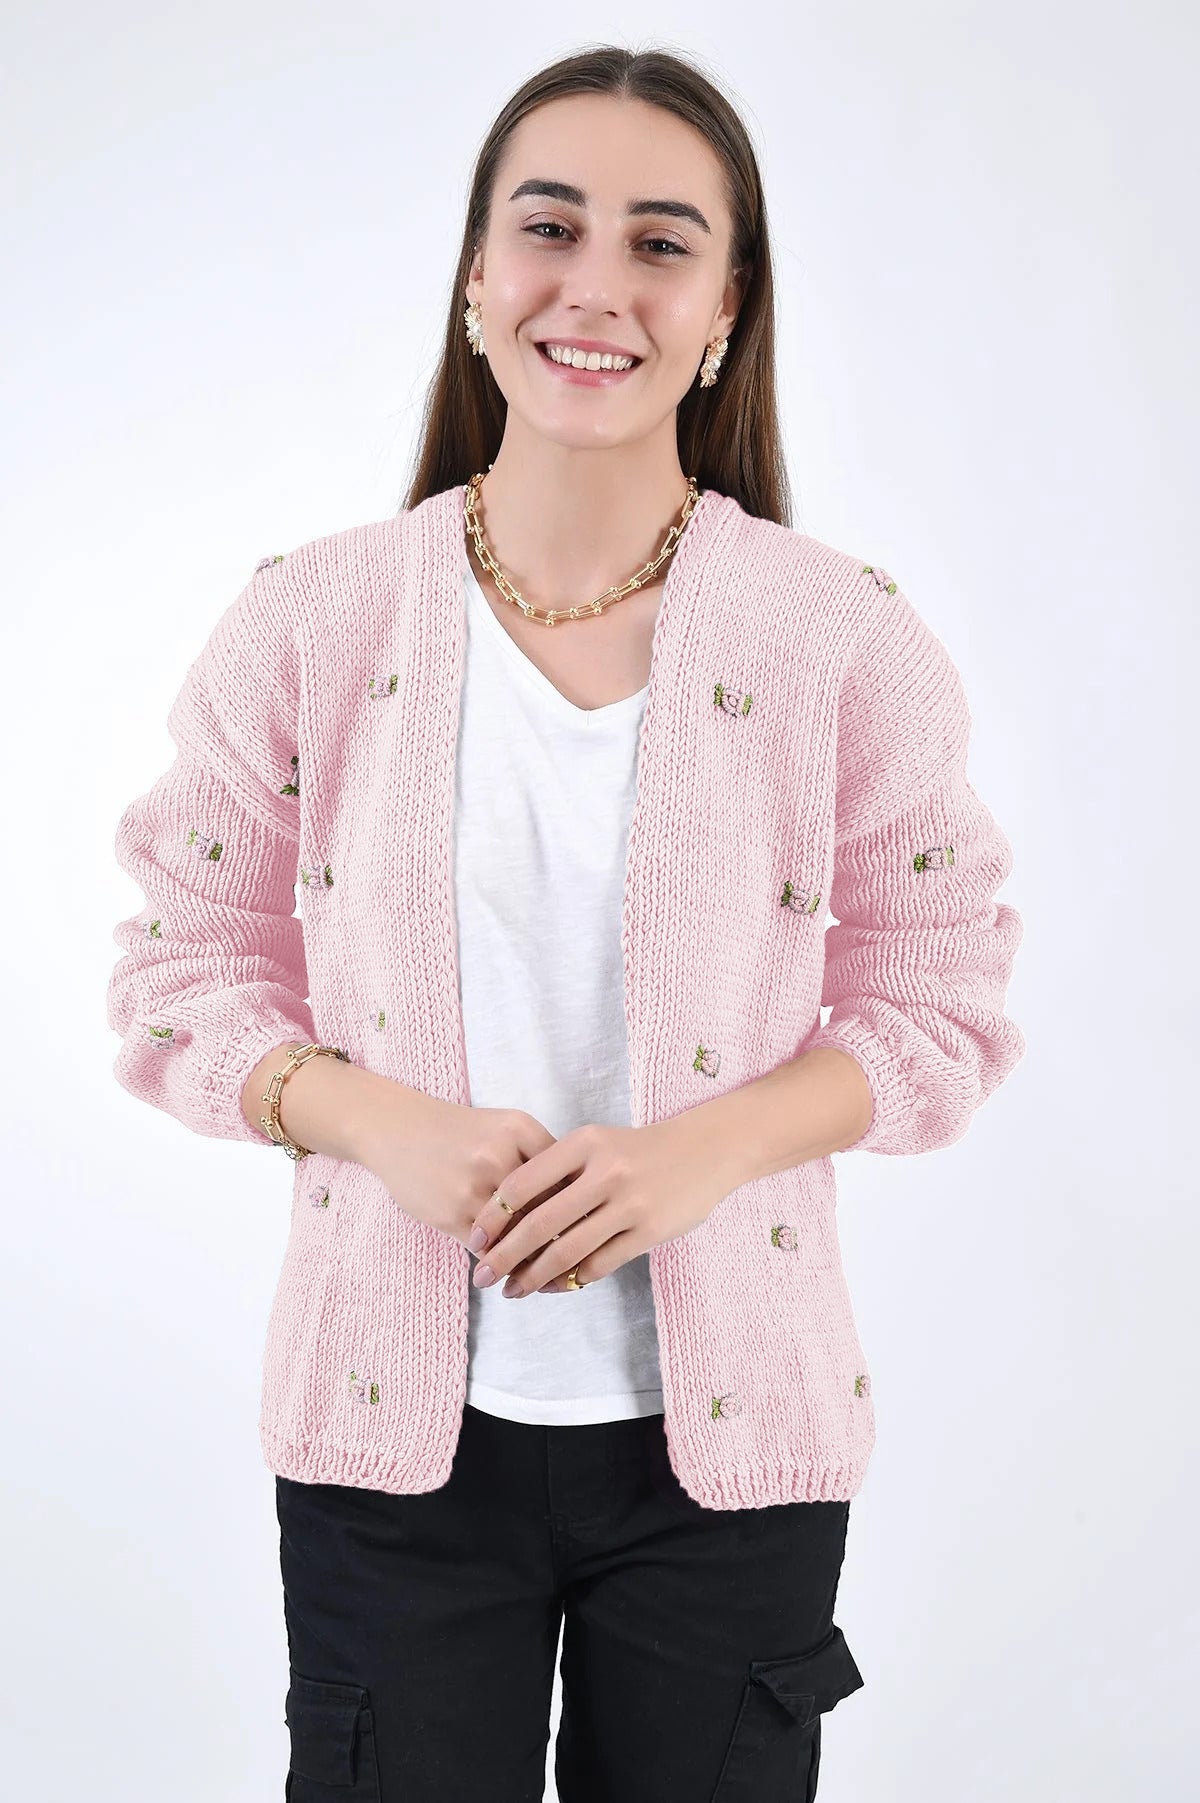 WINTER BLOOM PINK ROSE Cotton Cardigan (Pre-Order) by Fanm Mon